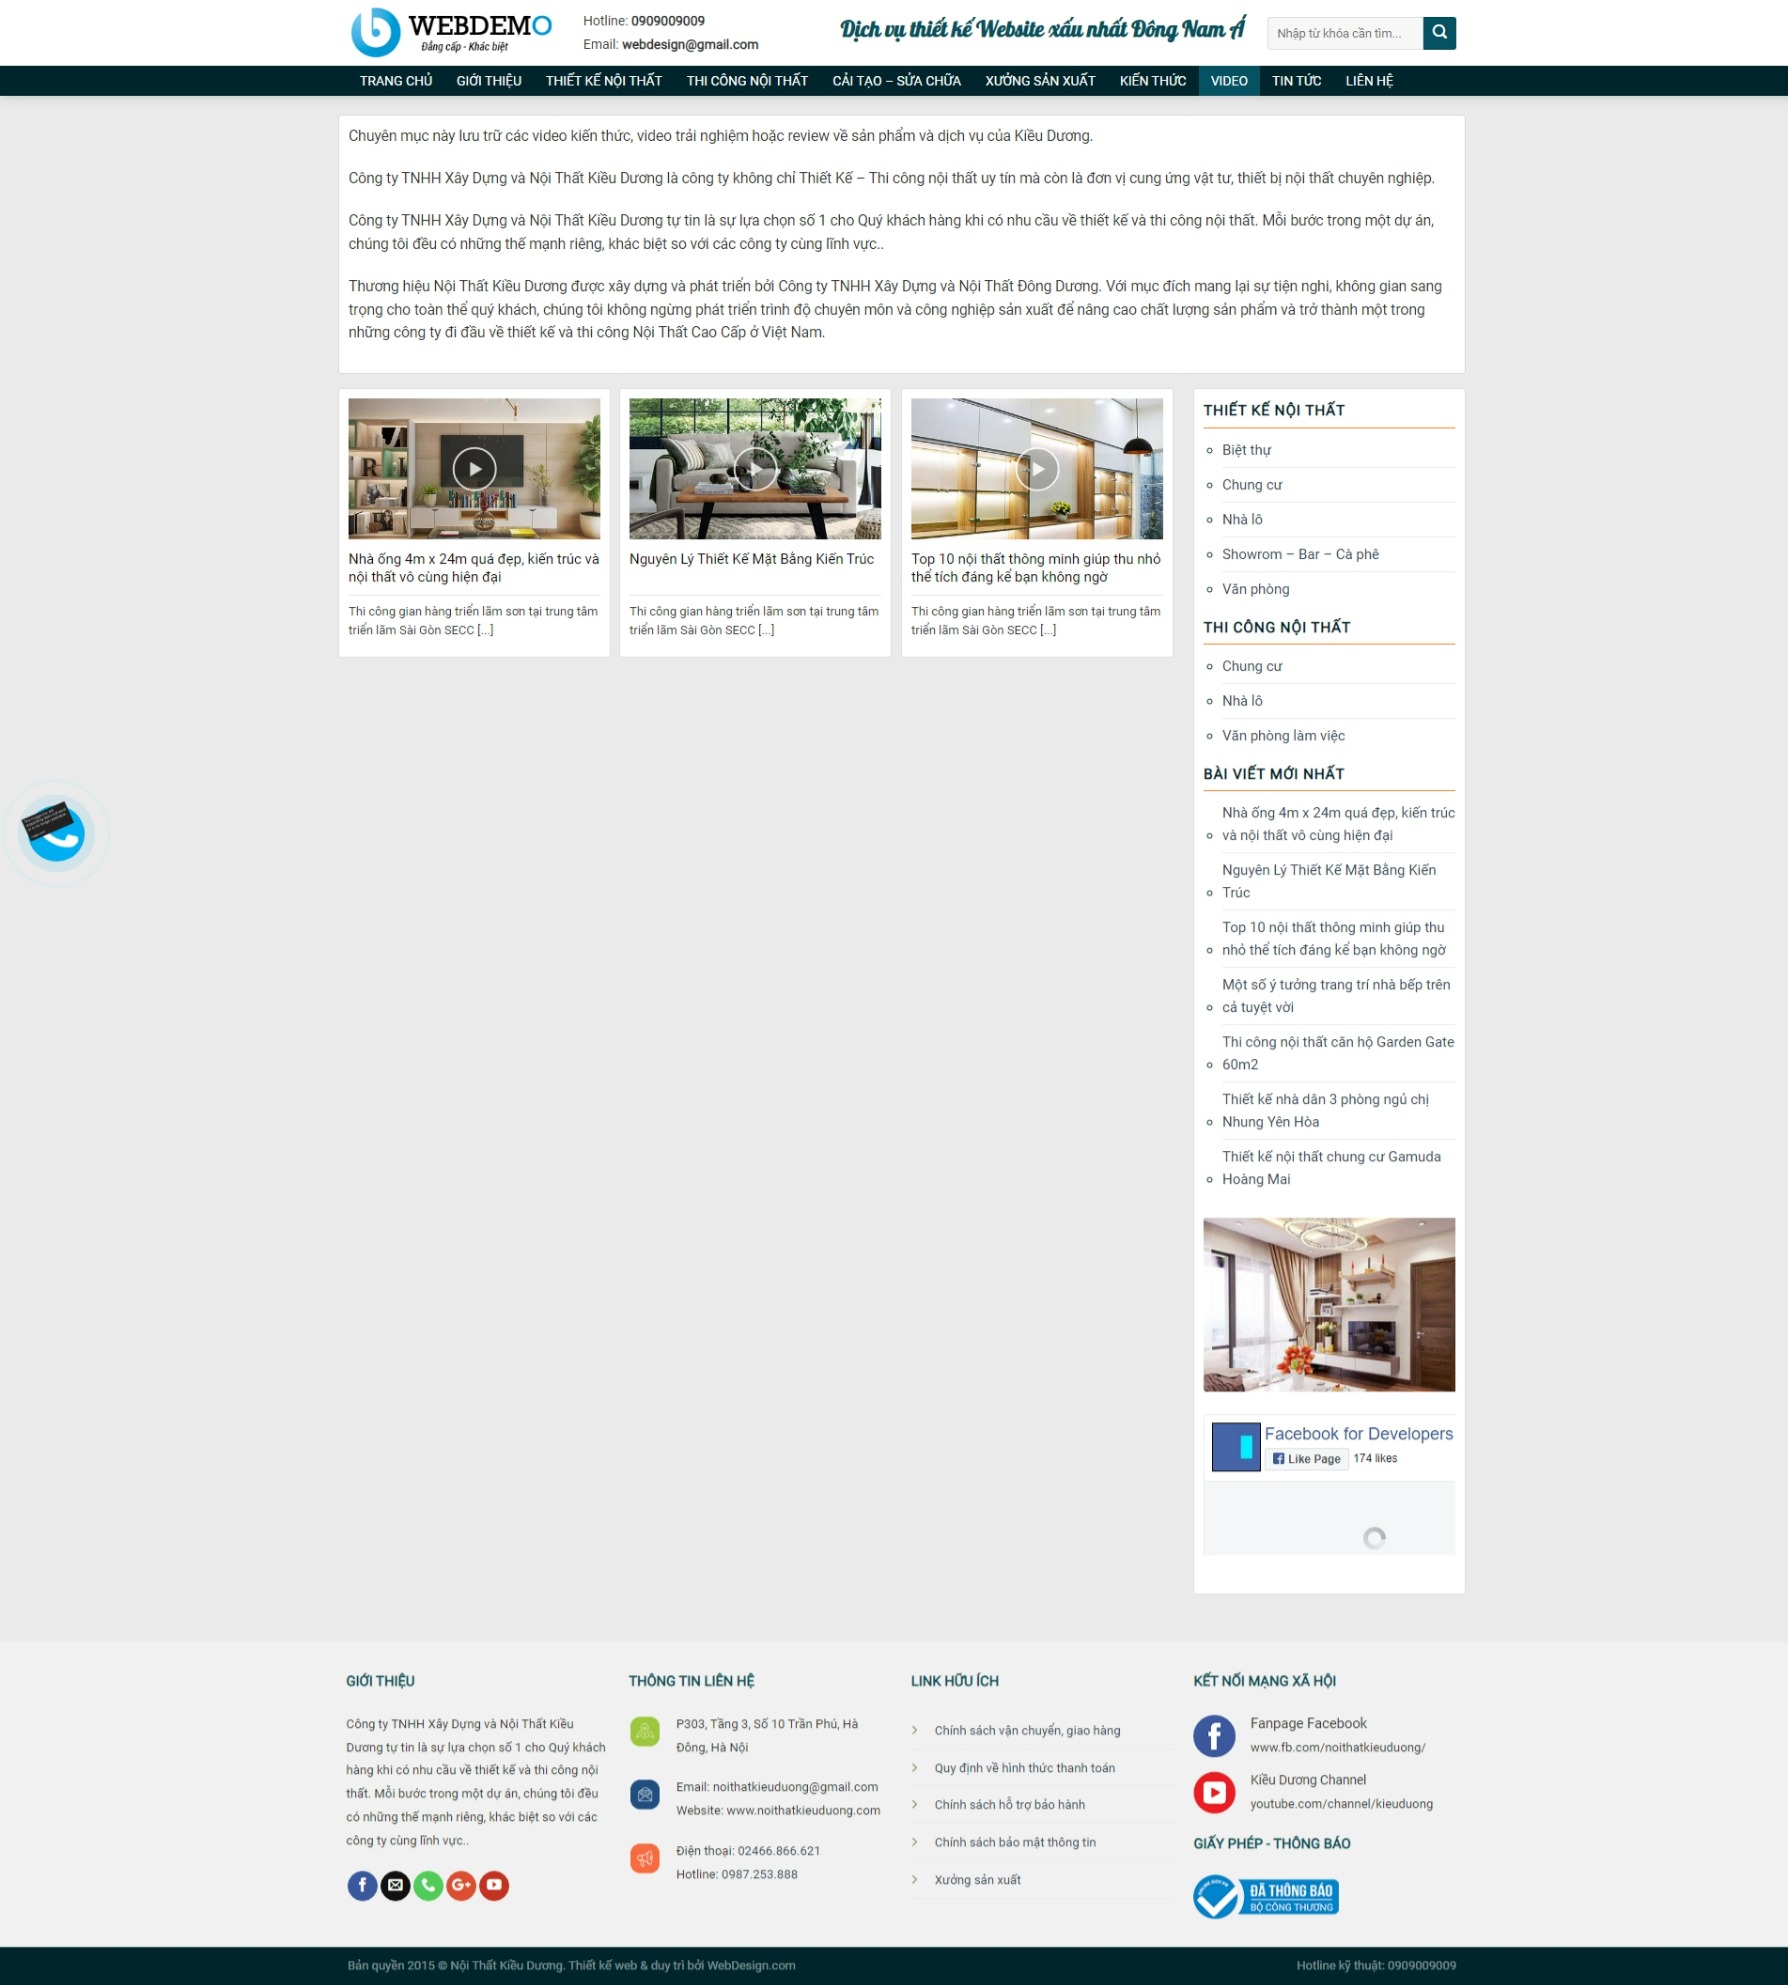 Website introducing architectural design company with news by wordpress